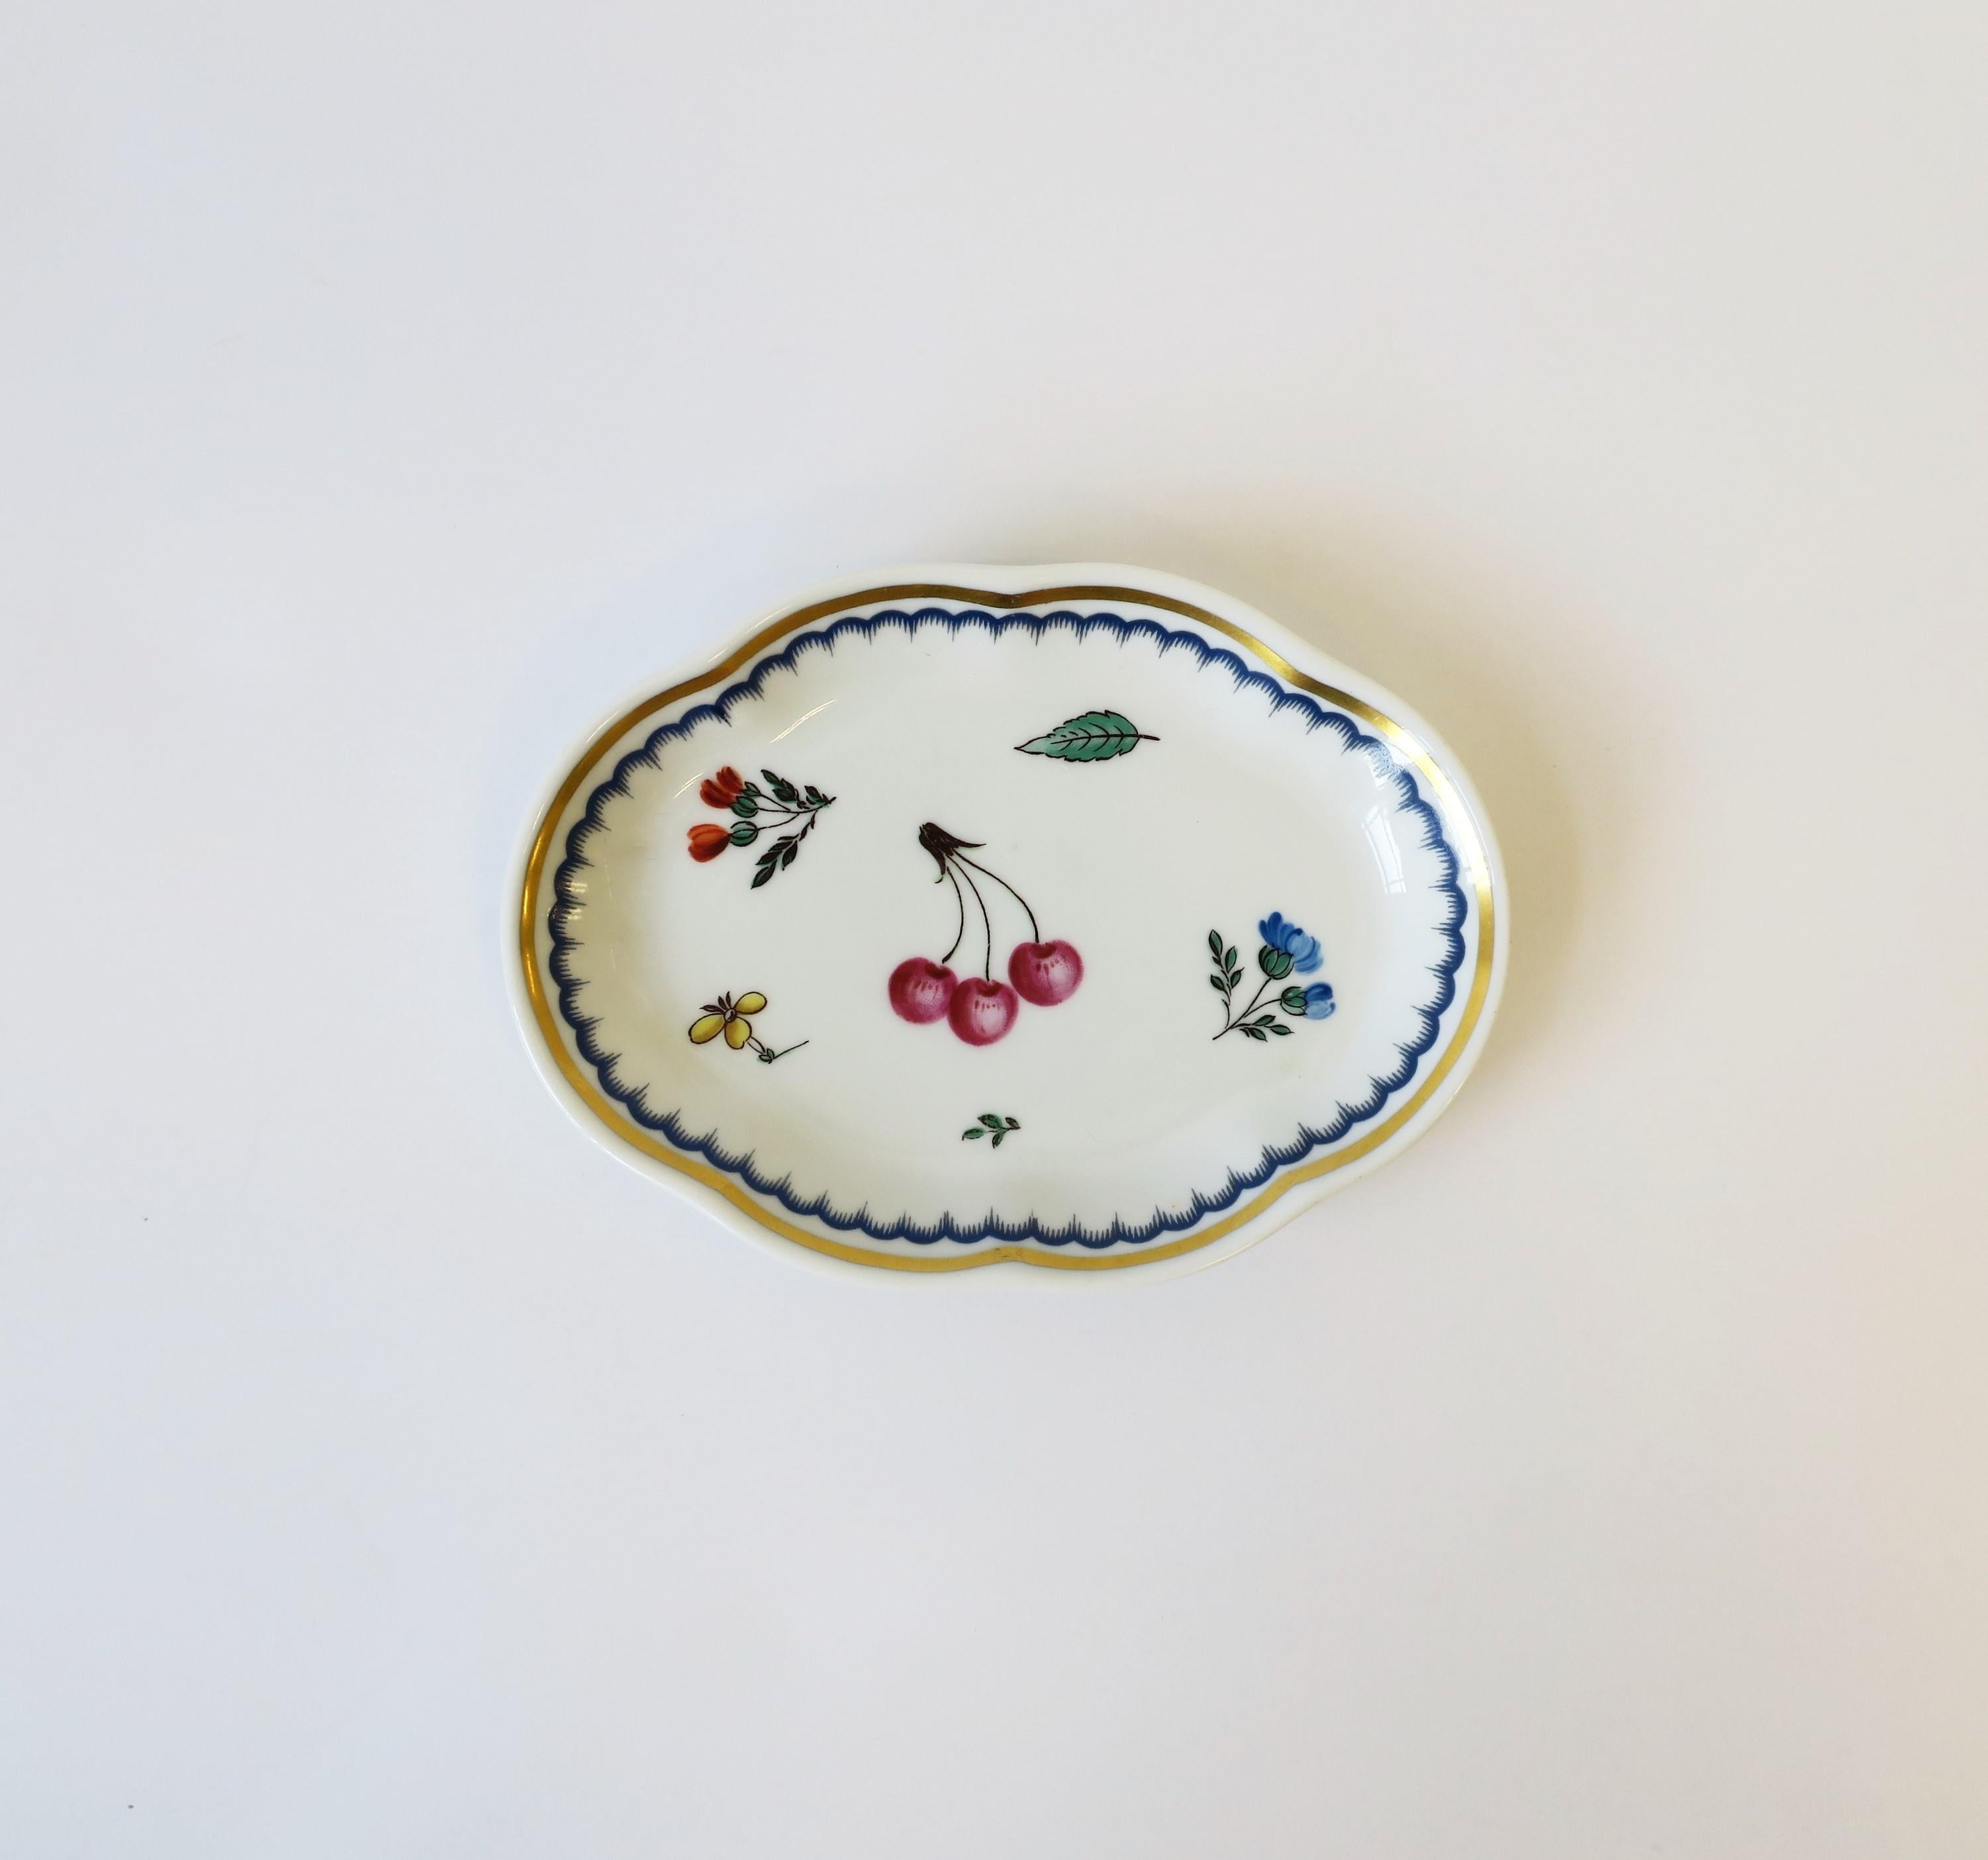 A beautiful vintage Richard Ginori fruit and flower, white and gold, oval porcelain Italian jewelry dish, circa mid-20th century, Italy. Dish, by Italian designer Richard Ginori, has a center area featuring a fruit (cherries) and flower design,